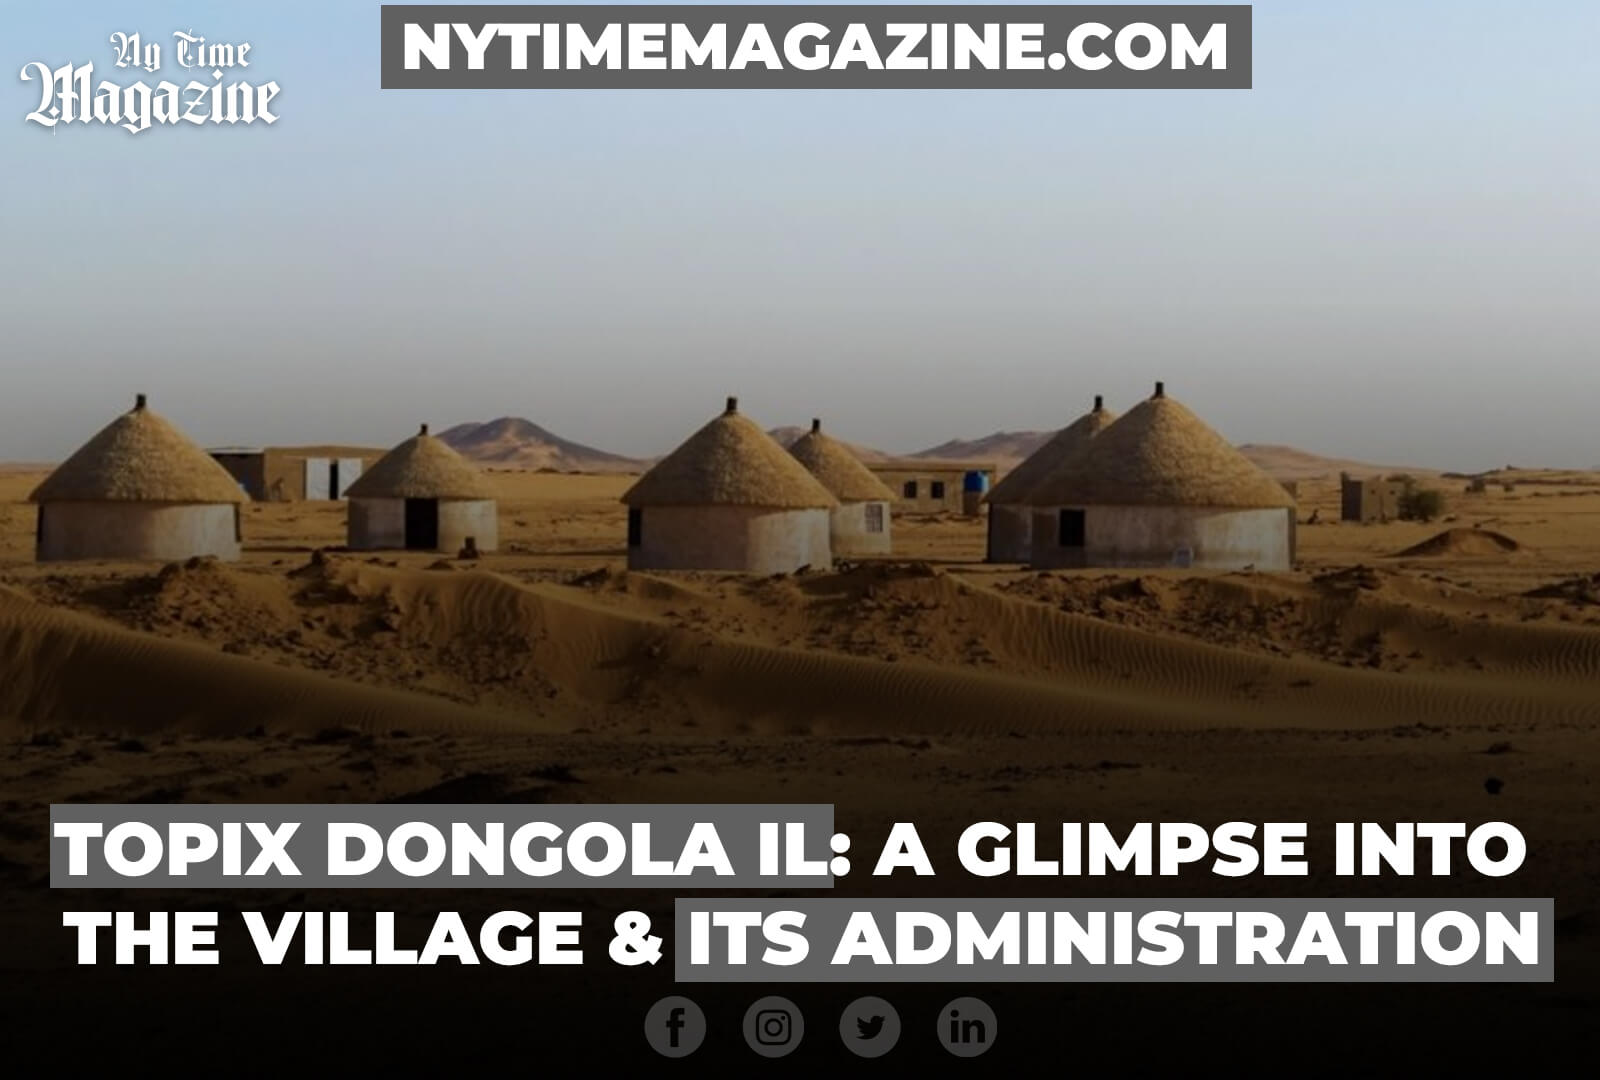 TOPIX DONGOLA IL: A GLIMPSE INTO THE VILLAGE AND ITS ADMINISTRATION